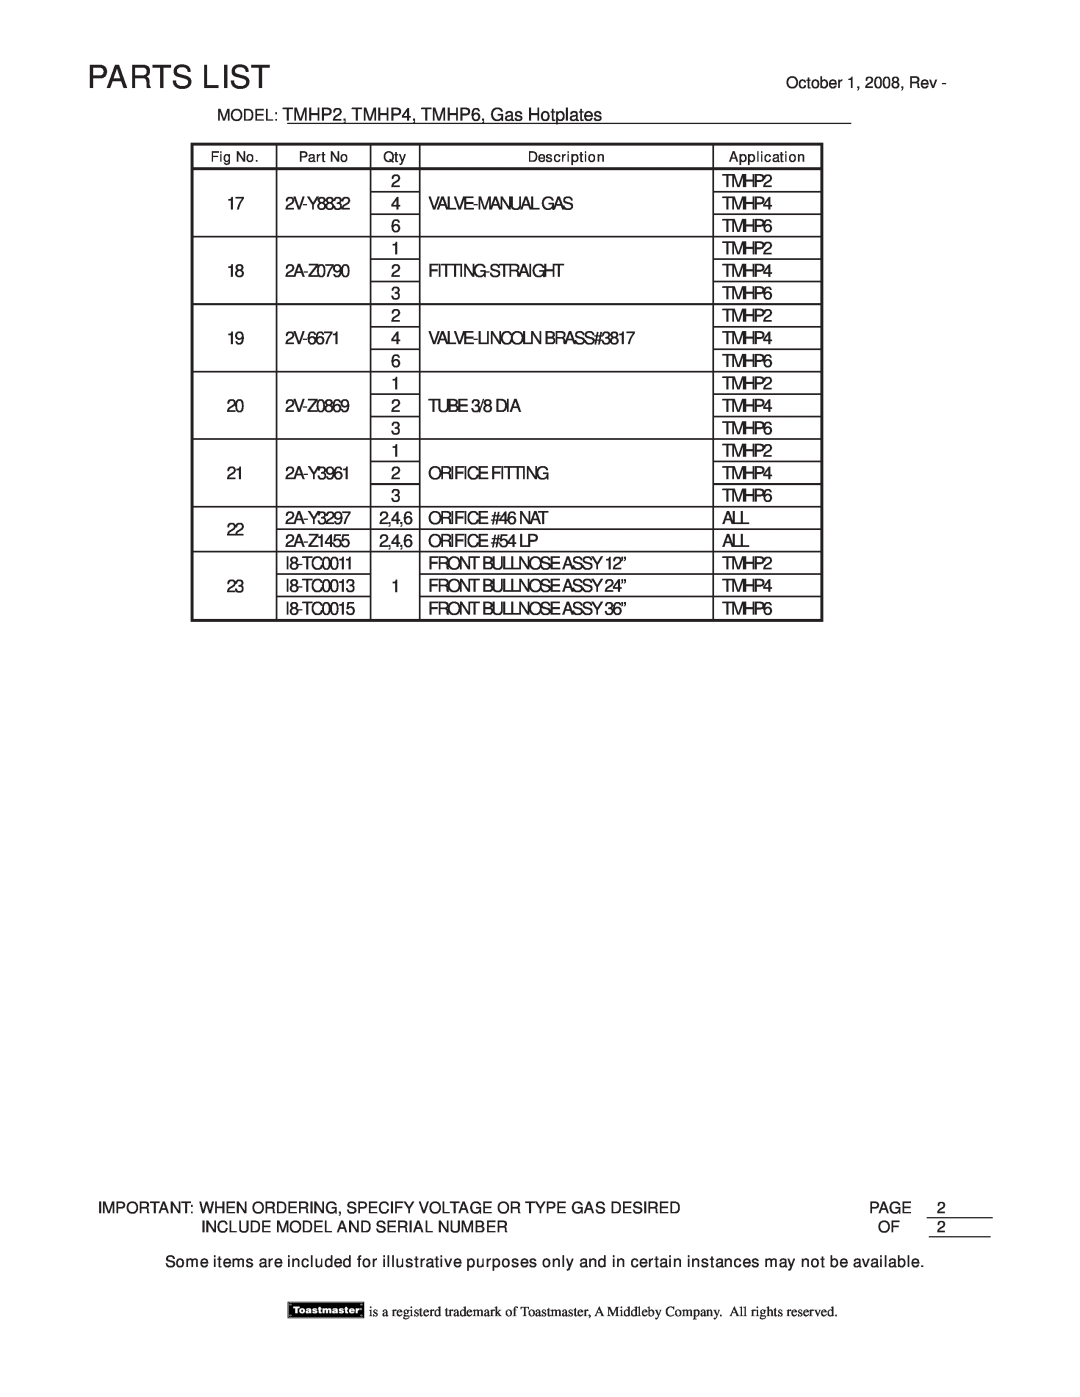 Toastmaster THMP2 manual Parts List, MODEL TMHP2, TMHP4, TMHP6, Gas Hotplates 